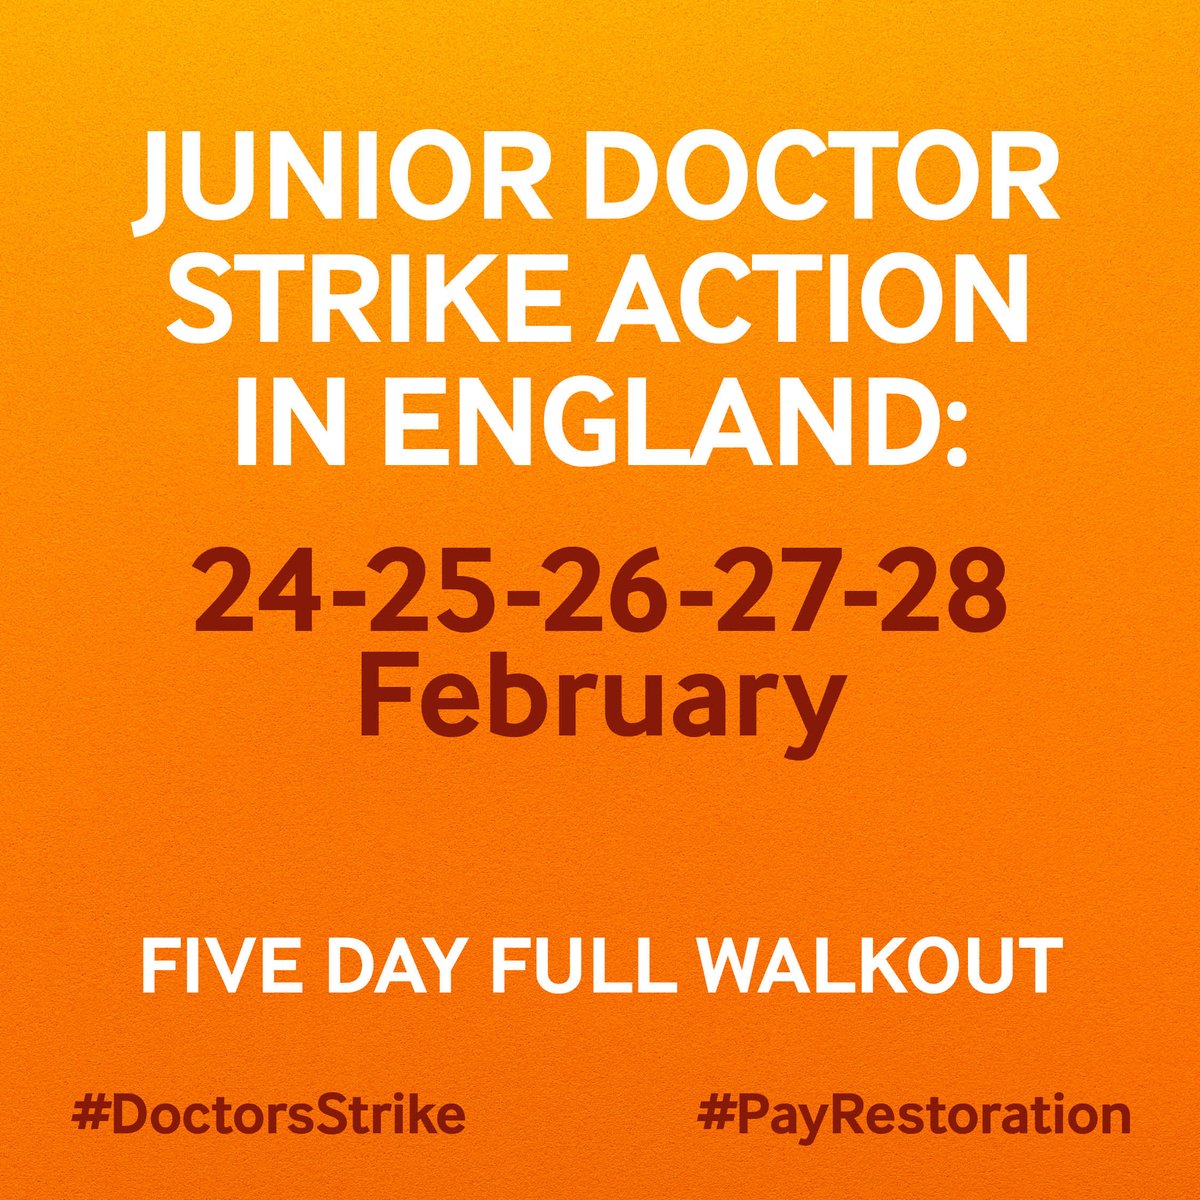 From 7am, we strike again. The Government had the option to avert this strike. We offered to cancel if they extended our mandate and they declined. We're still willing to cancel at any point if they come back with a credible offer on the table. #DoctorsStrike #PayRestoration